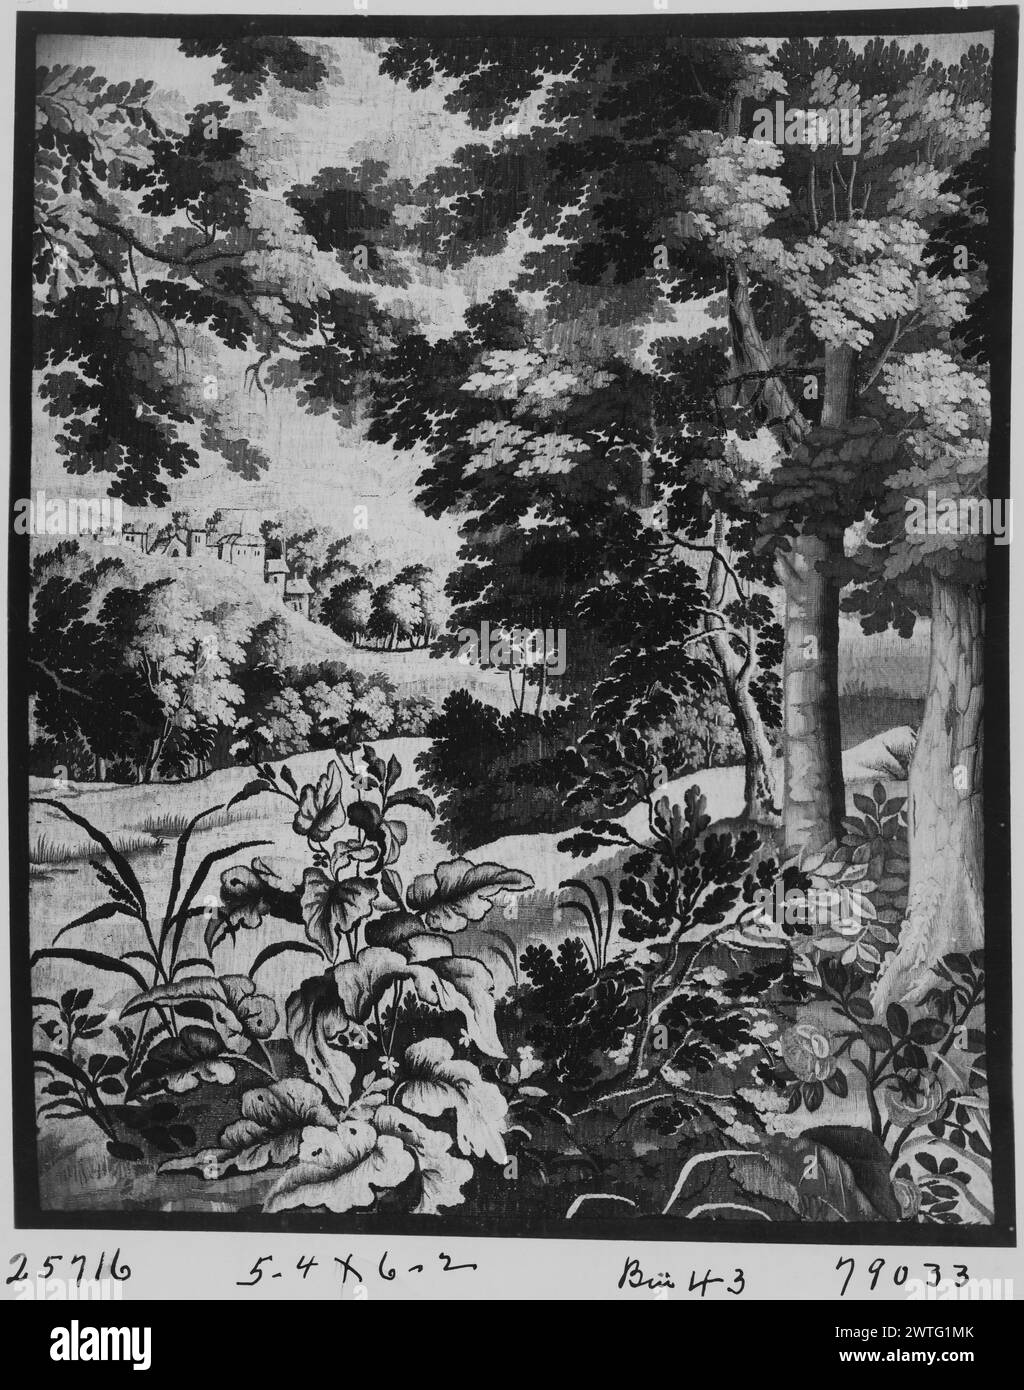 Landscape with building on hill in middle distance. unknown c. 1650-1675 Tapestry Dimensions: H 6'2' x W 5'4' Tapestry Materials/Techniques: unknown Culture: Flemish Weaving Center: unknown Ownership History: French & Co. purchased from Mr. William Miller, received 7/18/1947; sold to U. R. [B?] Fraser 12/31/1949. Stock Photo